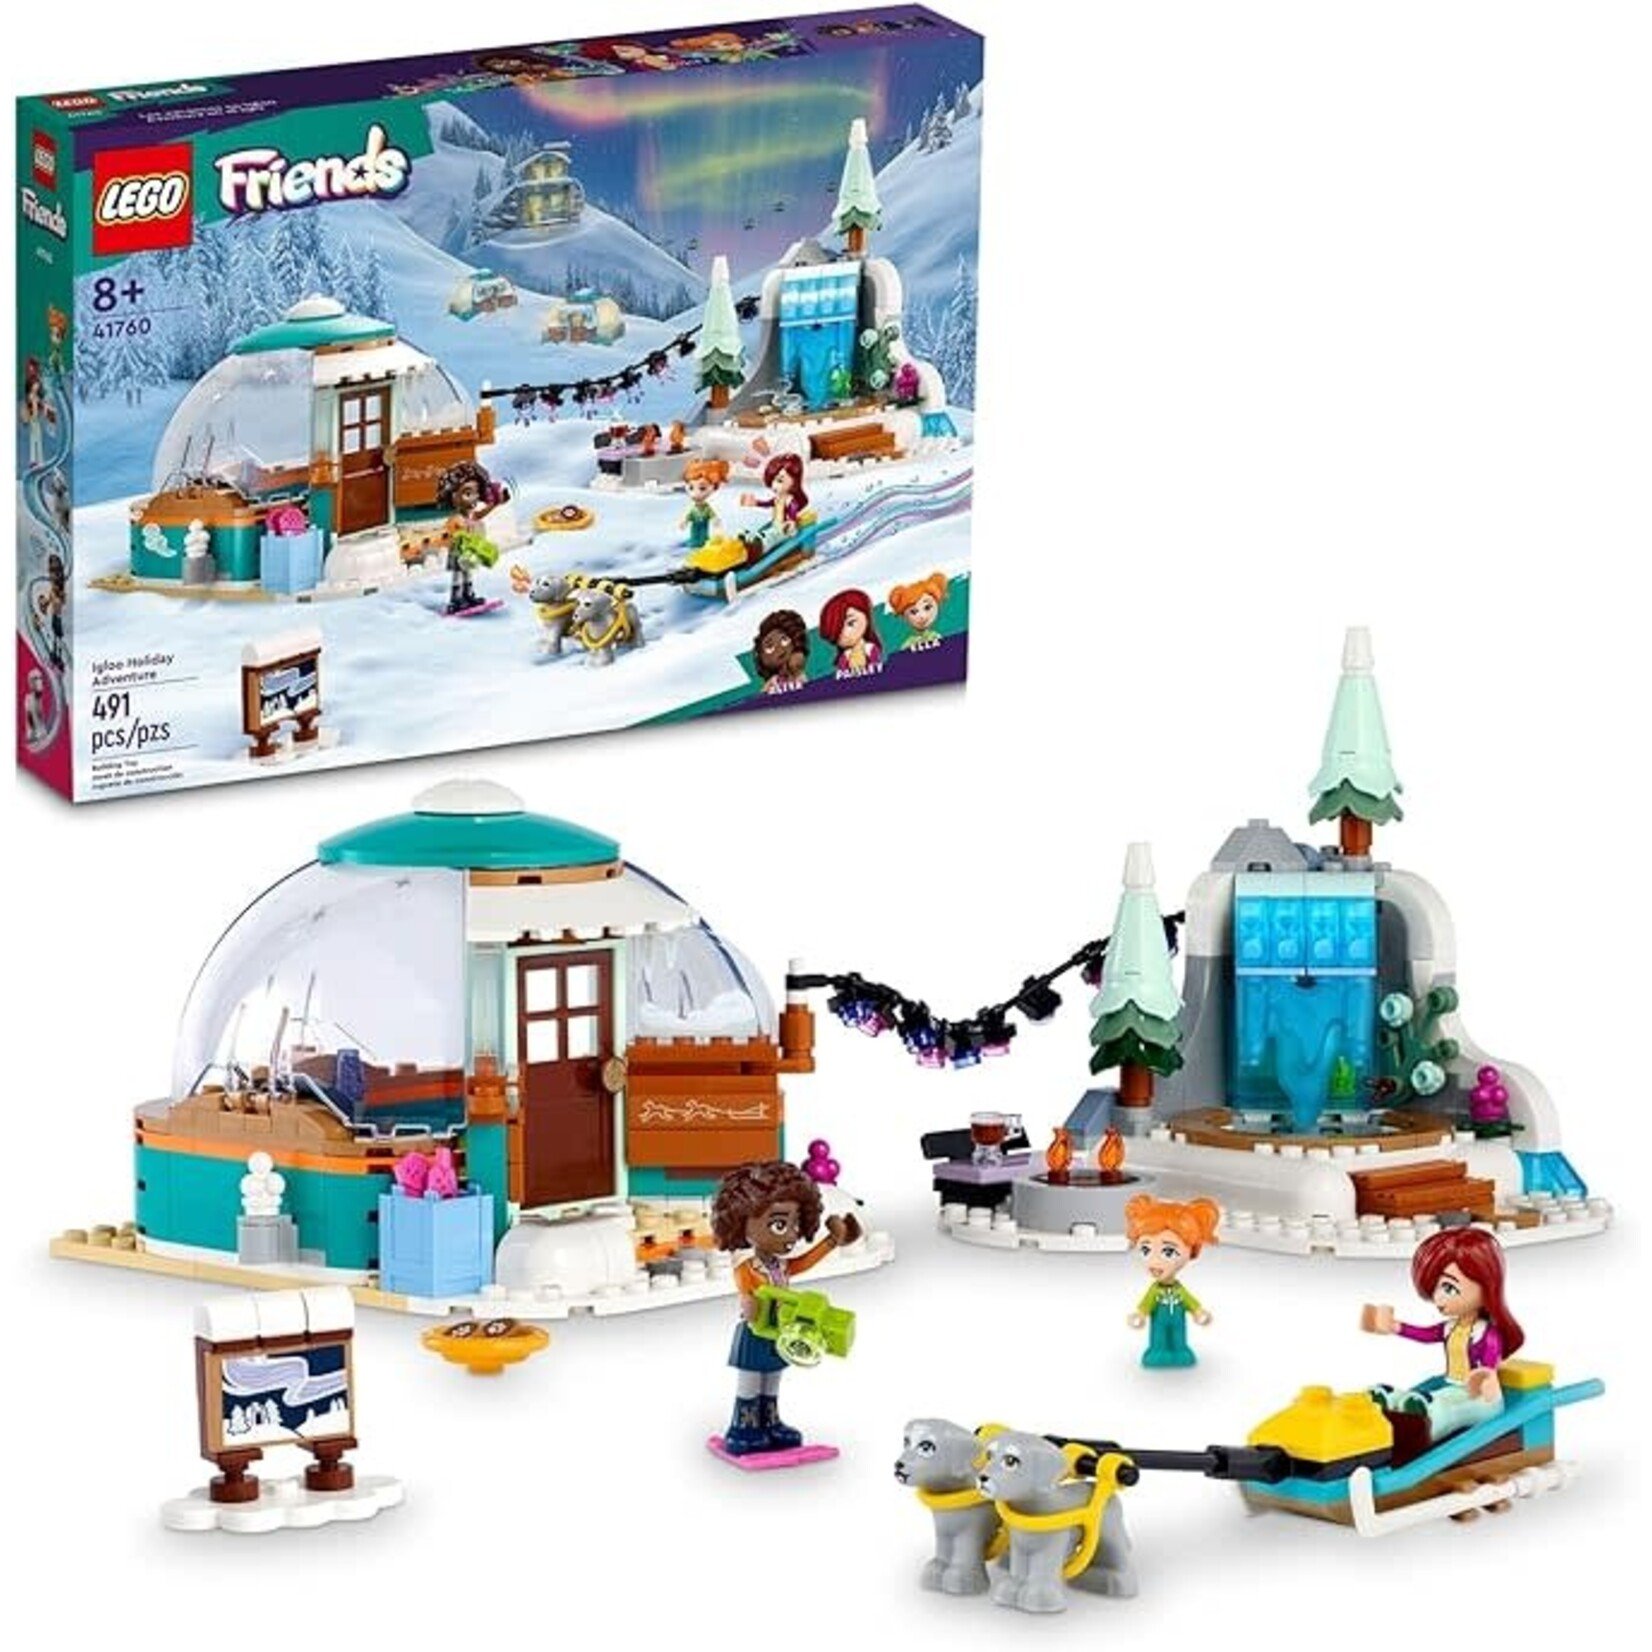 LEGO Friends Igloo Holiday Adventure (41760) - Labyrinth Games & Puzzles